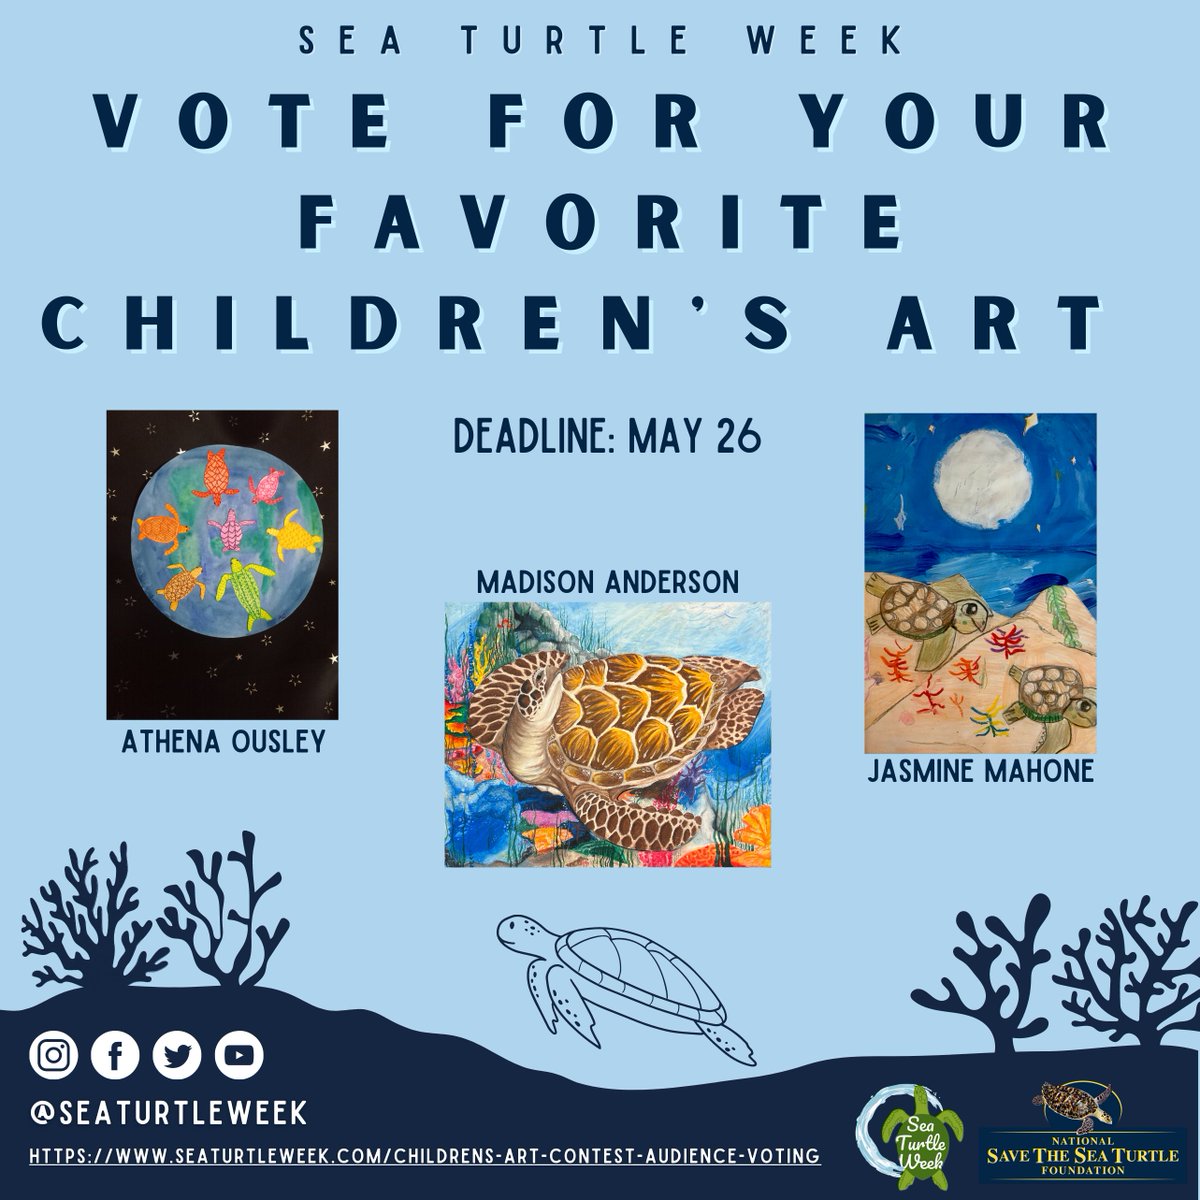 We received so many amazing pieces of artwork from children around the world for our 1st annual Sea Turtle Week Children’s Art Contest and now it's time to vote for your favorites!

Cast your vote here: seaturtleweek.com/photography-co…